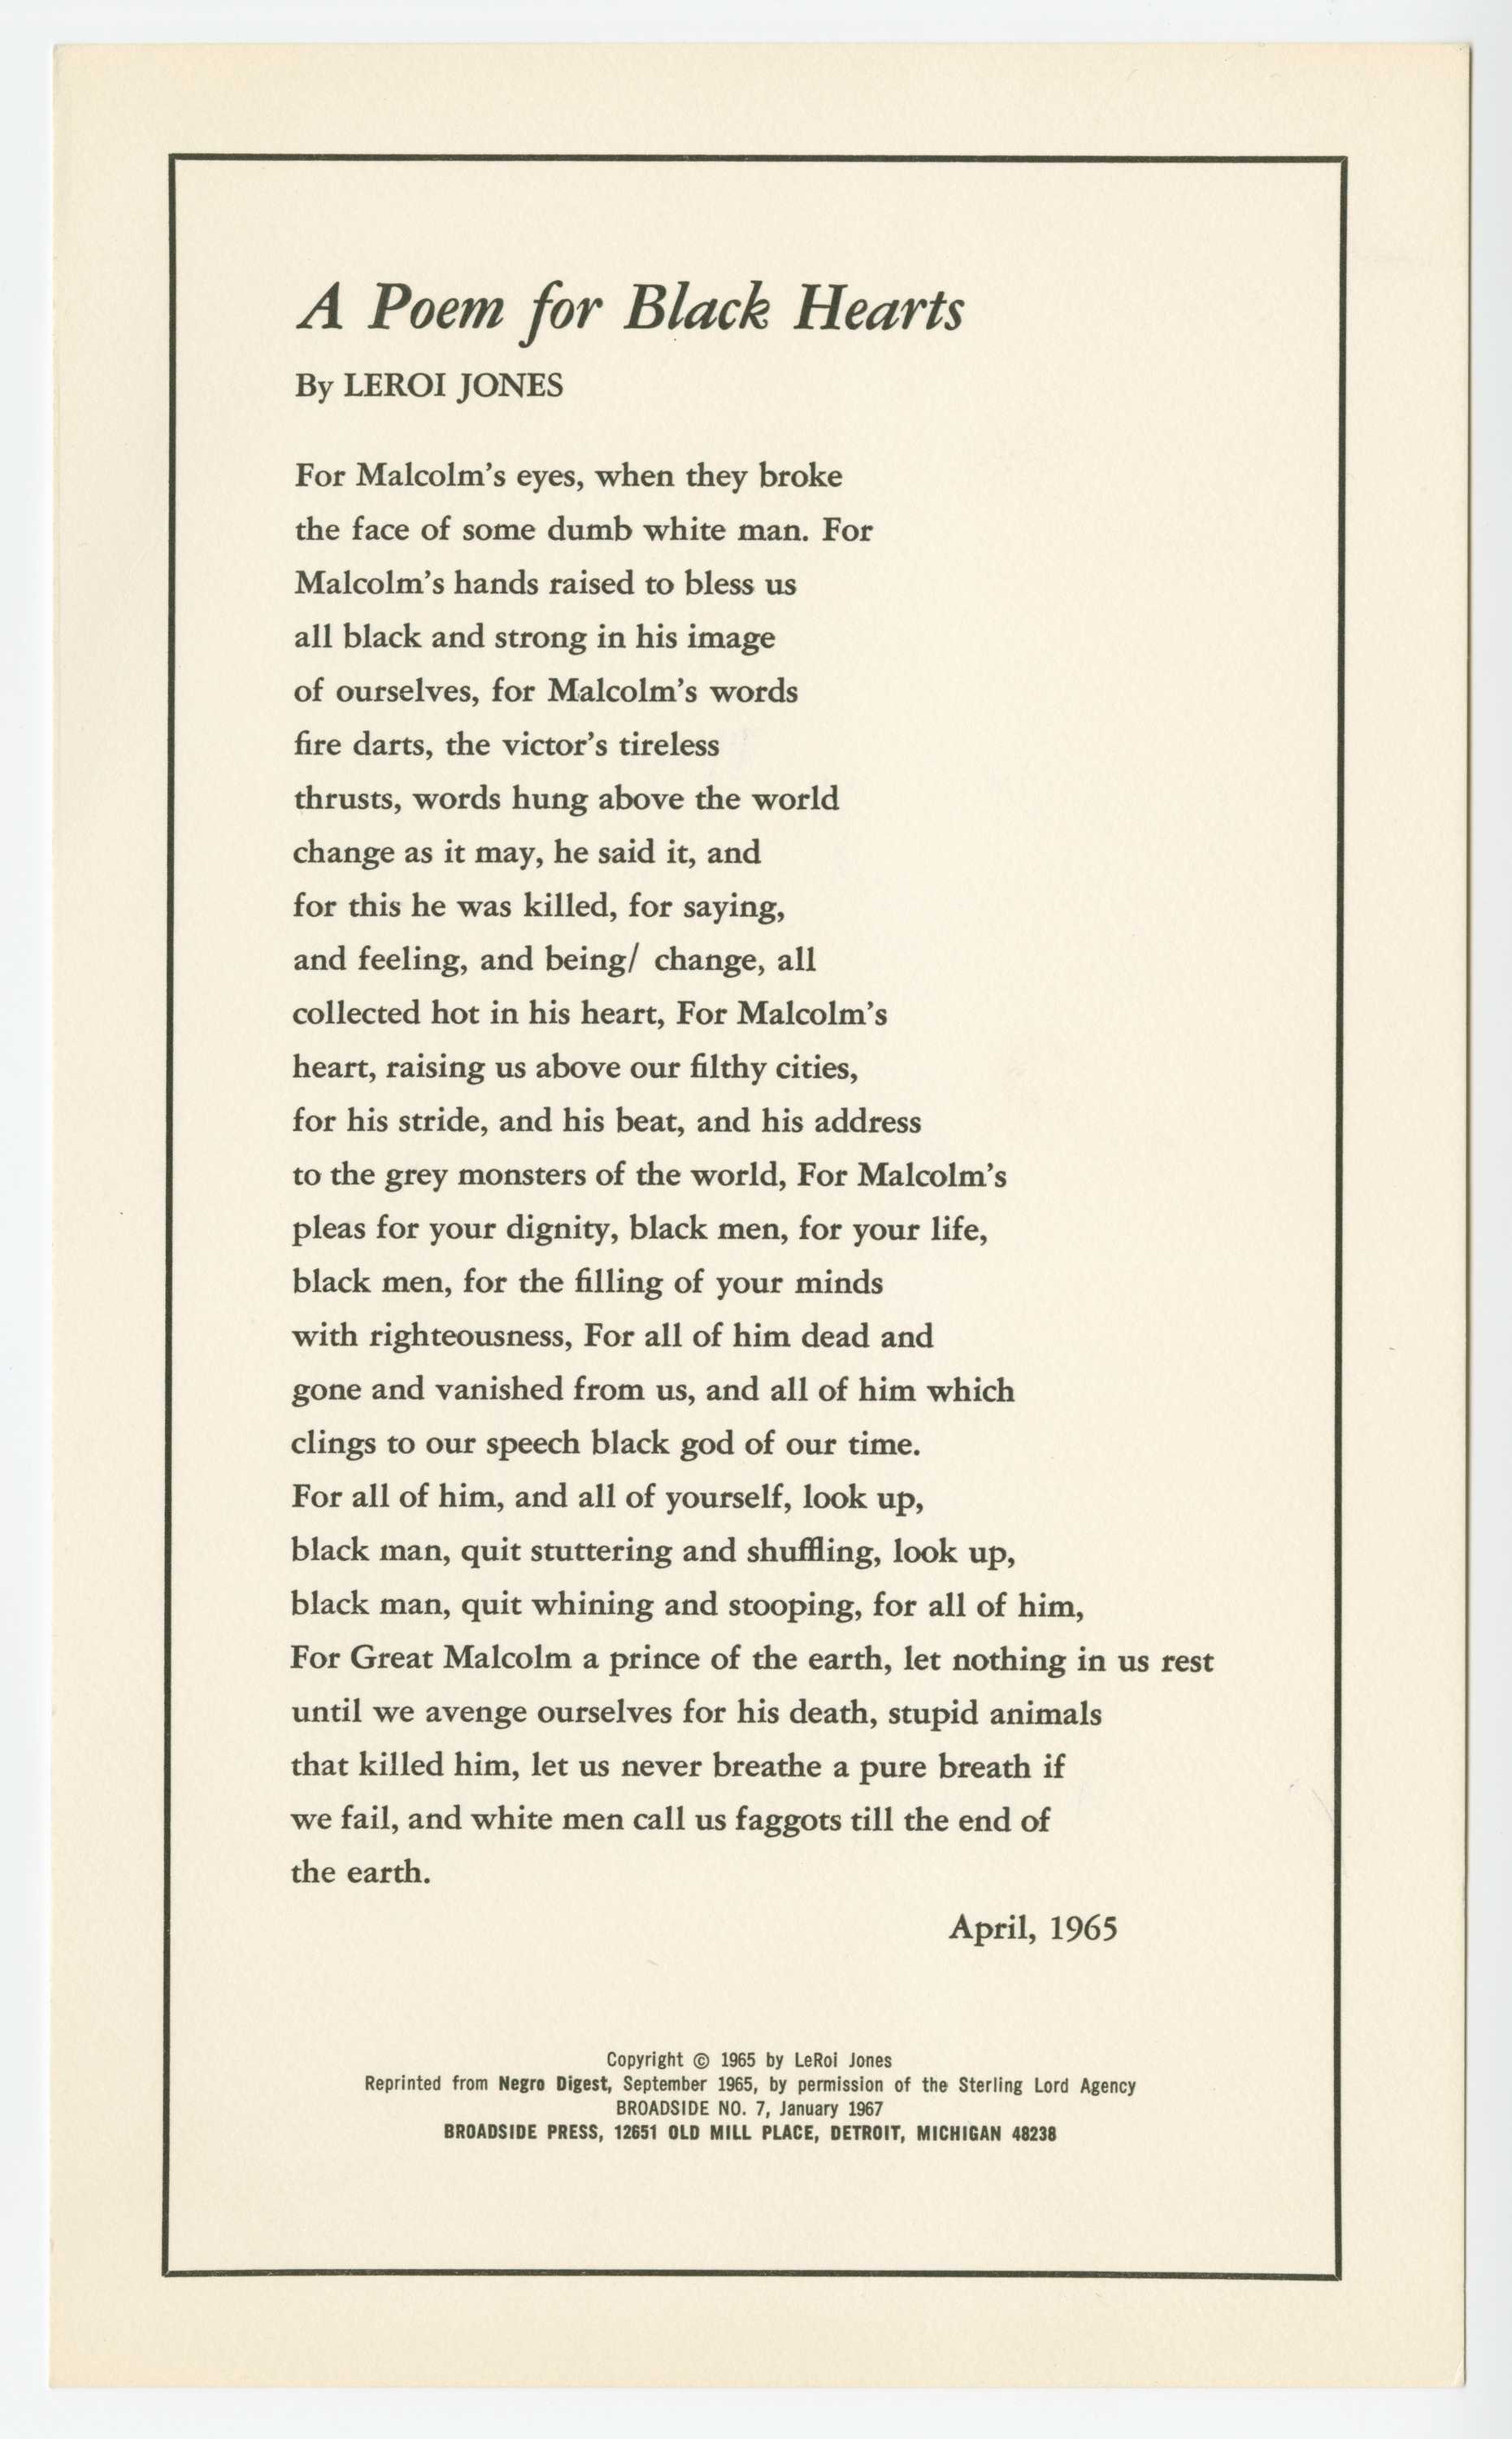 Poem printed in black ink on off-white paper titled A Poem for Black Hearts written by LeRoi Jones.